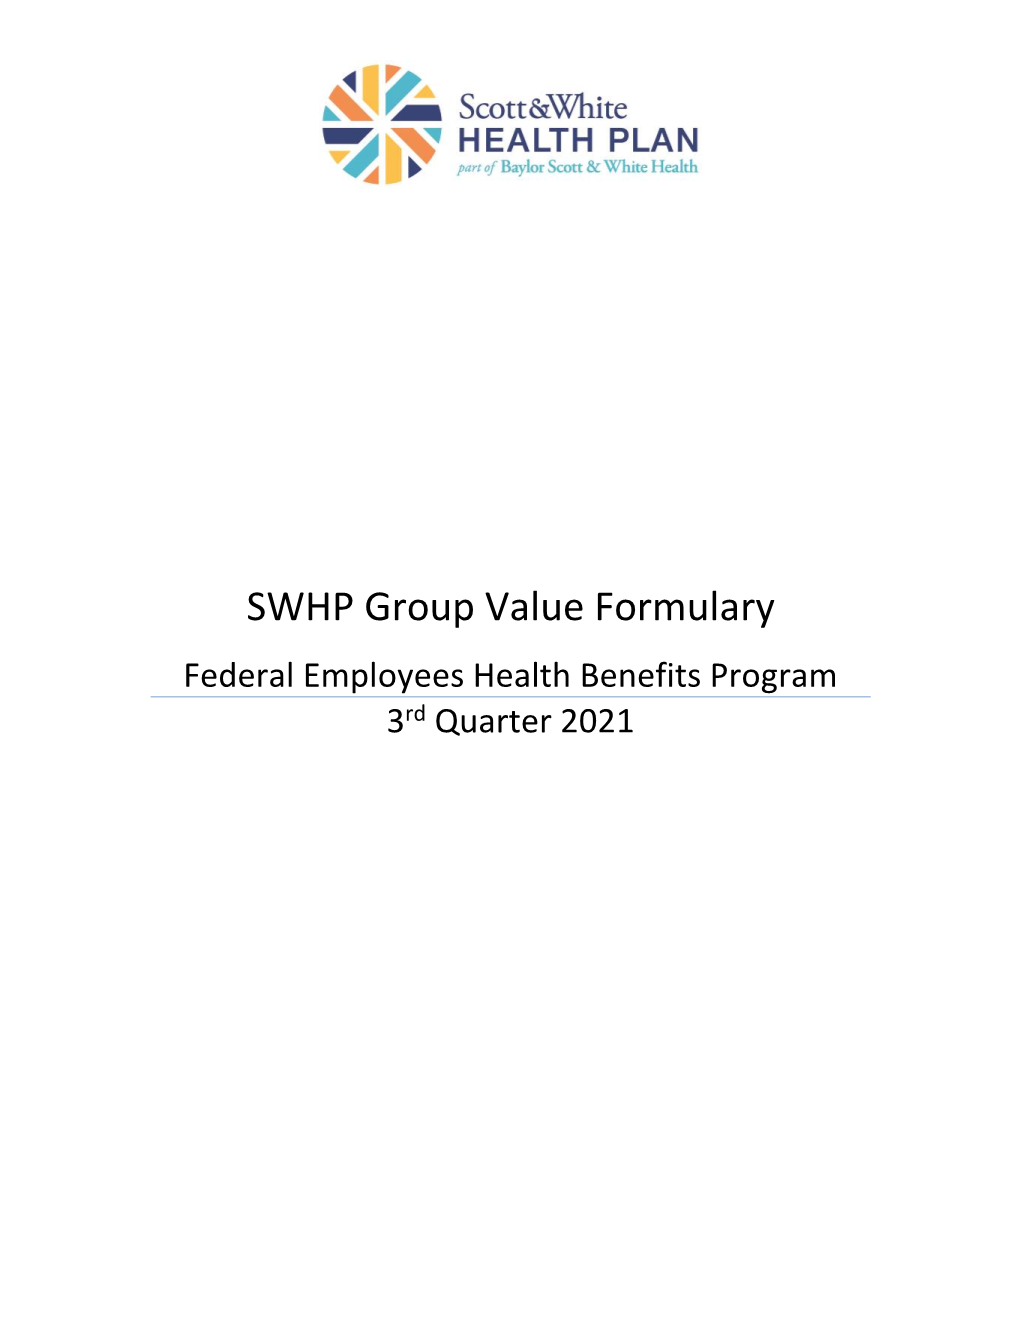 SWHPCGV (A6) Scott & White Health Plan Group Value Closed